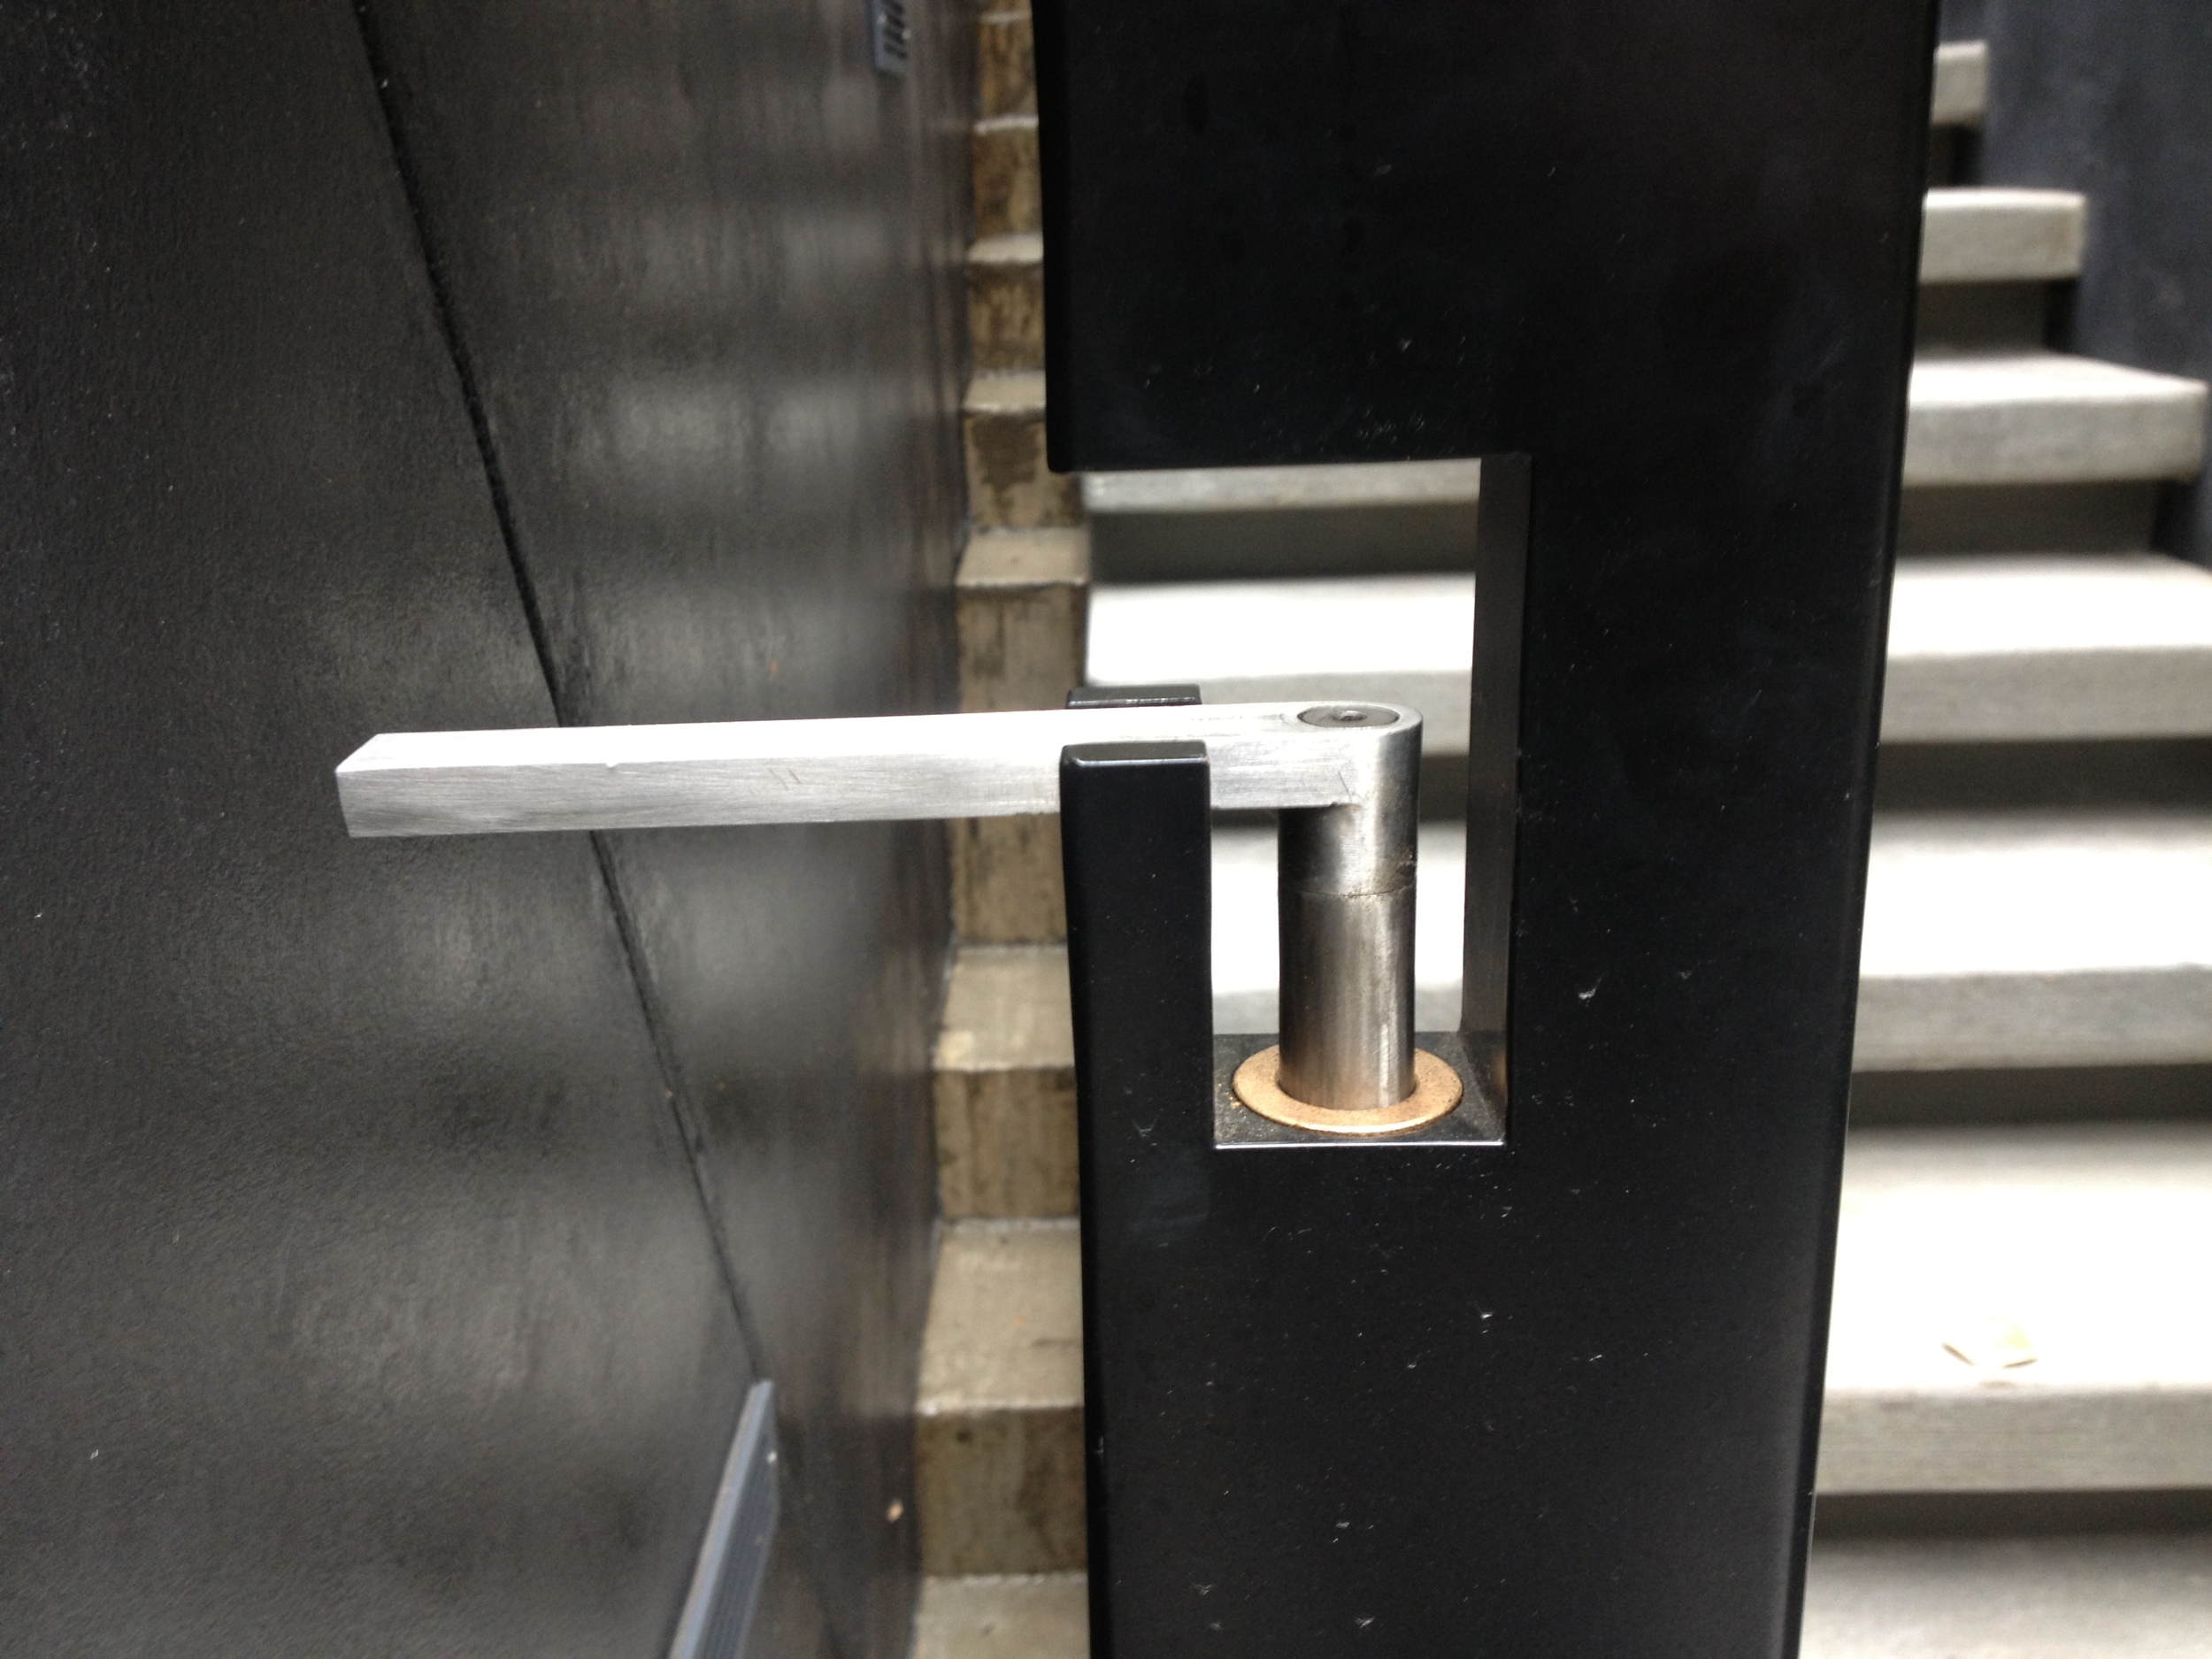  Gate with stainless steel handle that doubles as a cane bolt. Bronze bushing for long term no maintenance movement.  Designed by Skylab Architecture/Formed Objects 